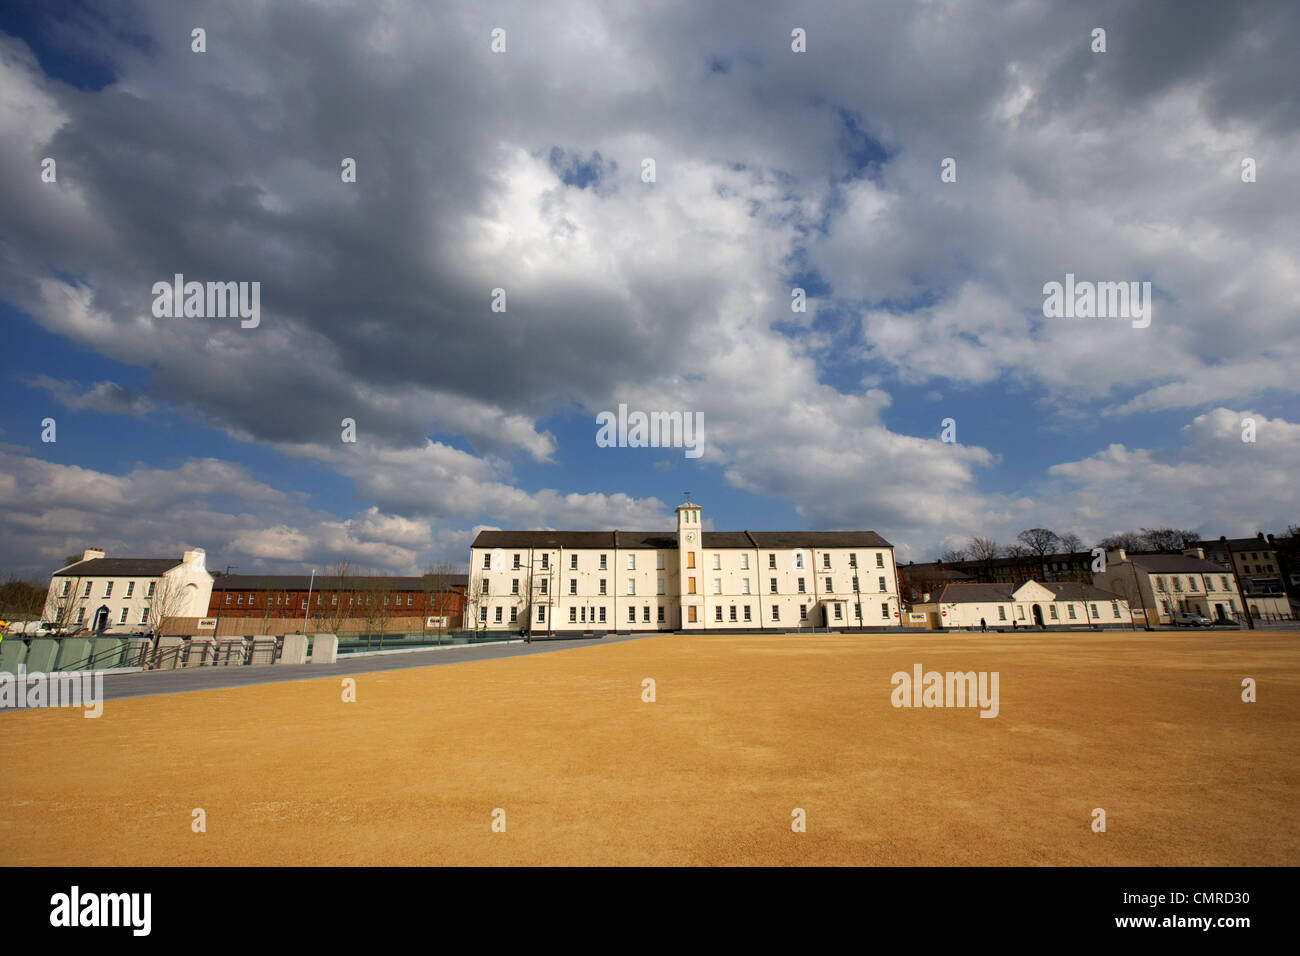 soldiers quarters with clock tower and parade ground in ebrington square former ebrington barracks british military base Derry c Stock Photo